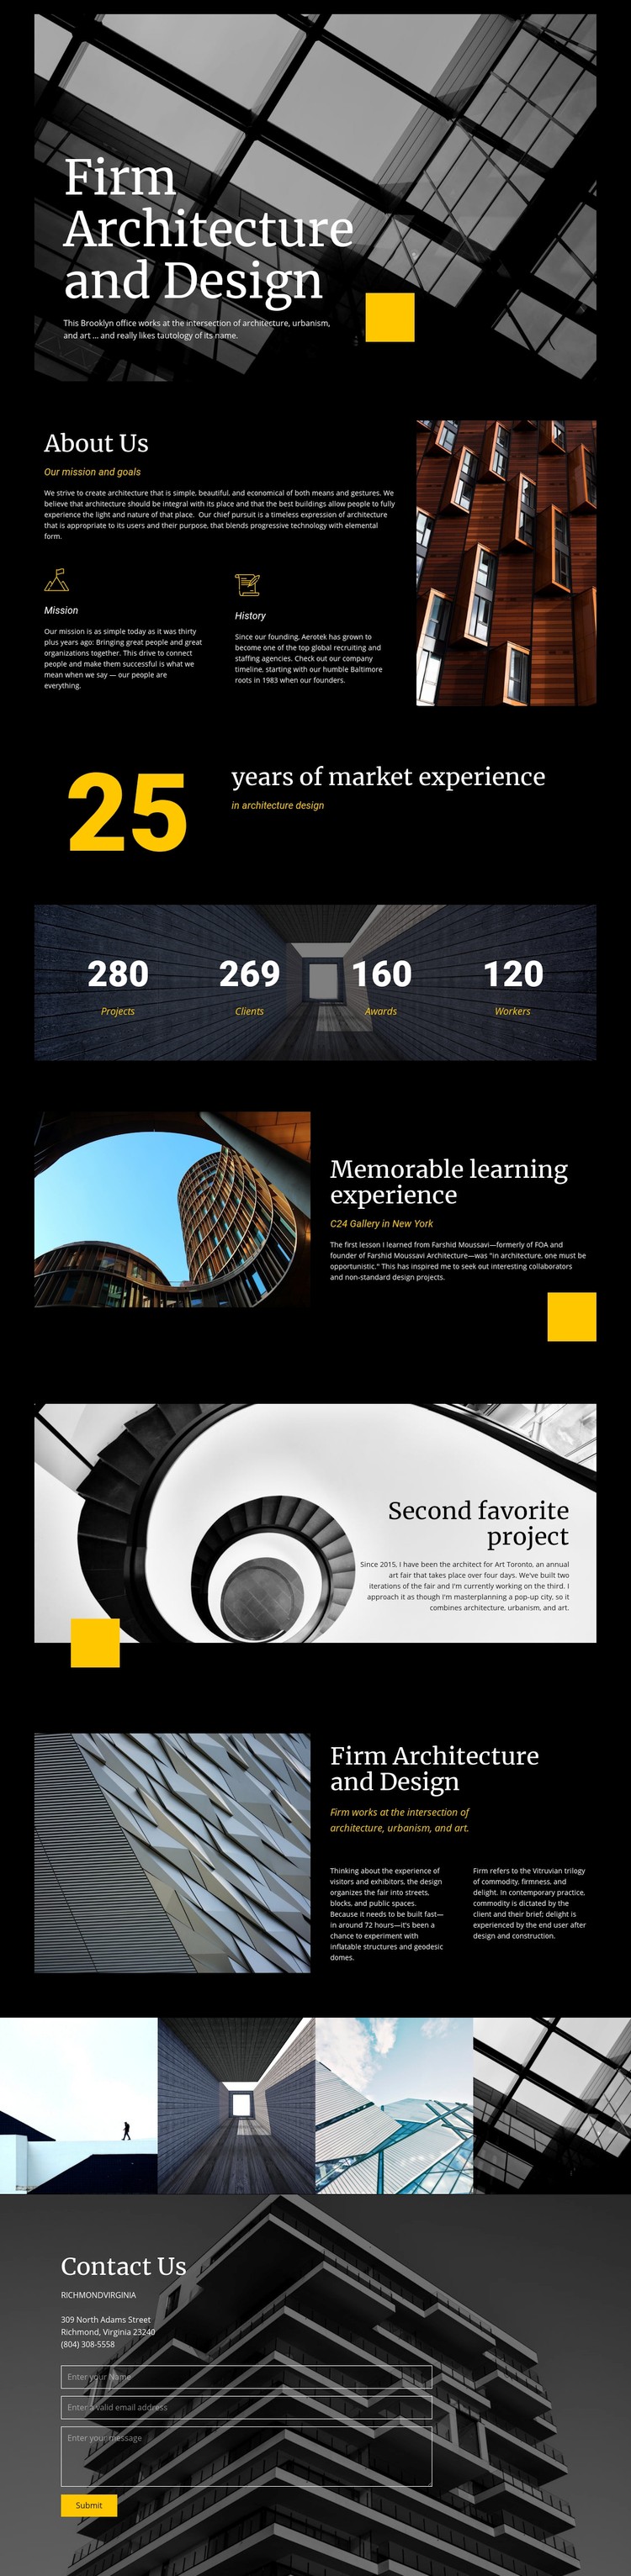 Firm architecture and Design Webflow Template Alternative